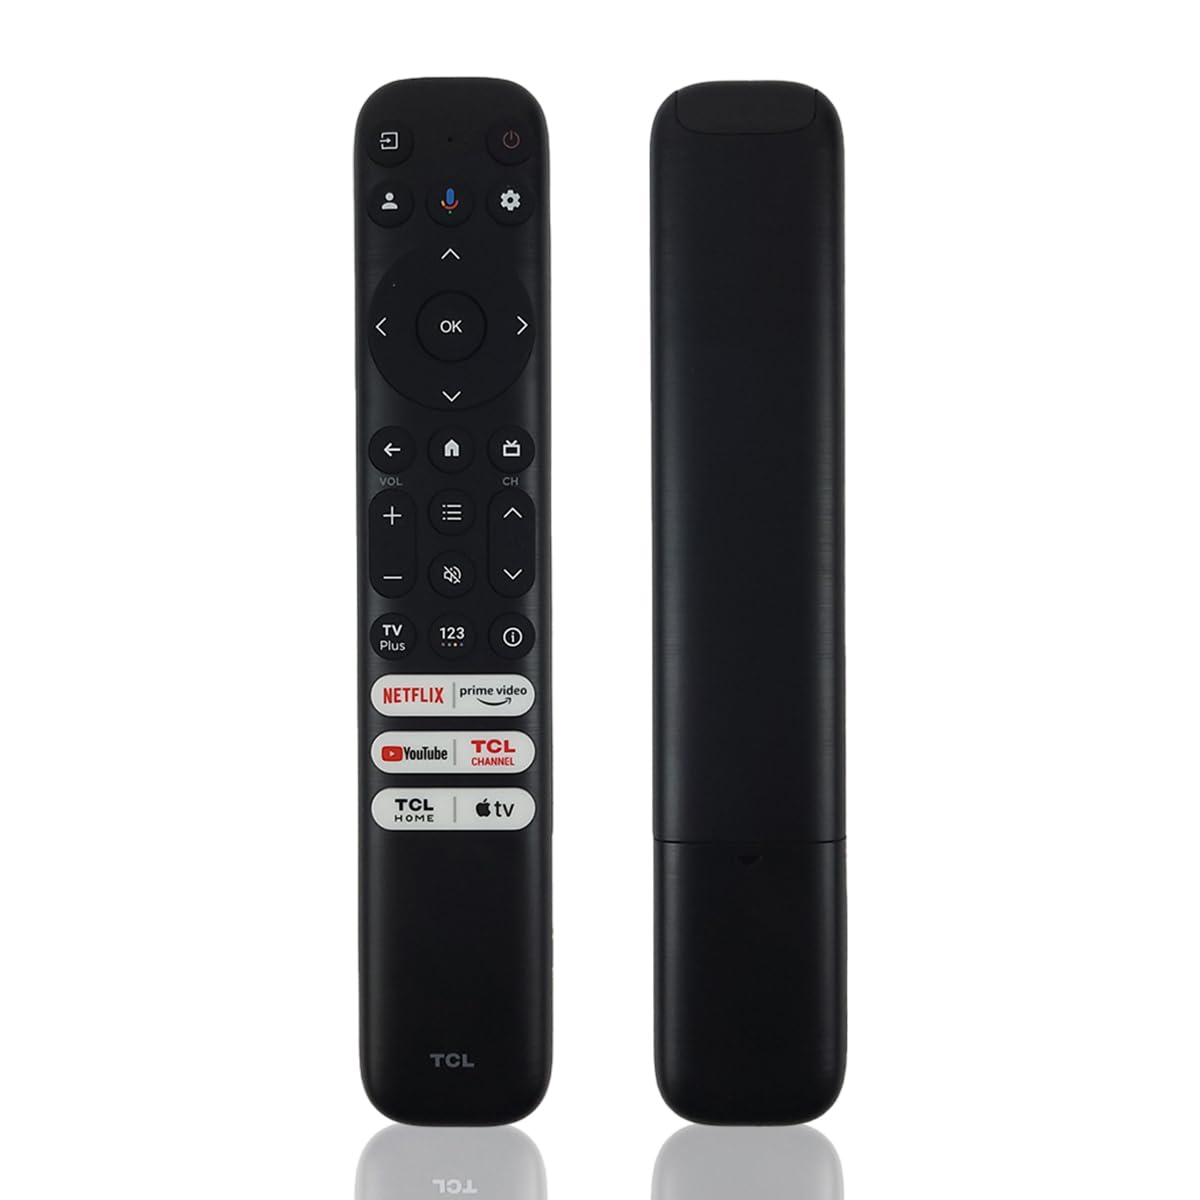 Ceybo OEM RC813 FMB1 Voice Remote Control fit for TCL QLED Smart TV, Works with Google Assistant, 55Q750G 43Q750G 65QM850G